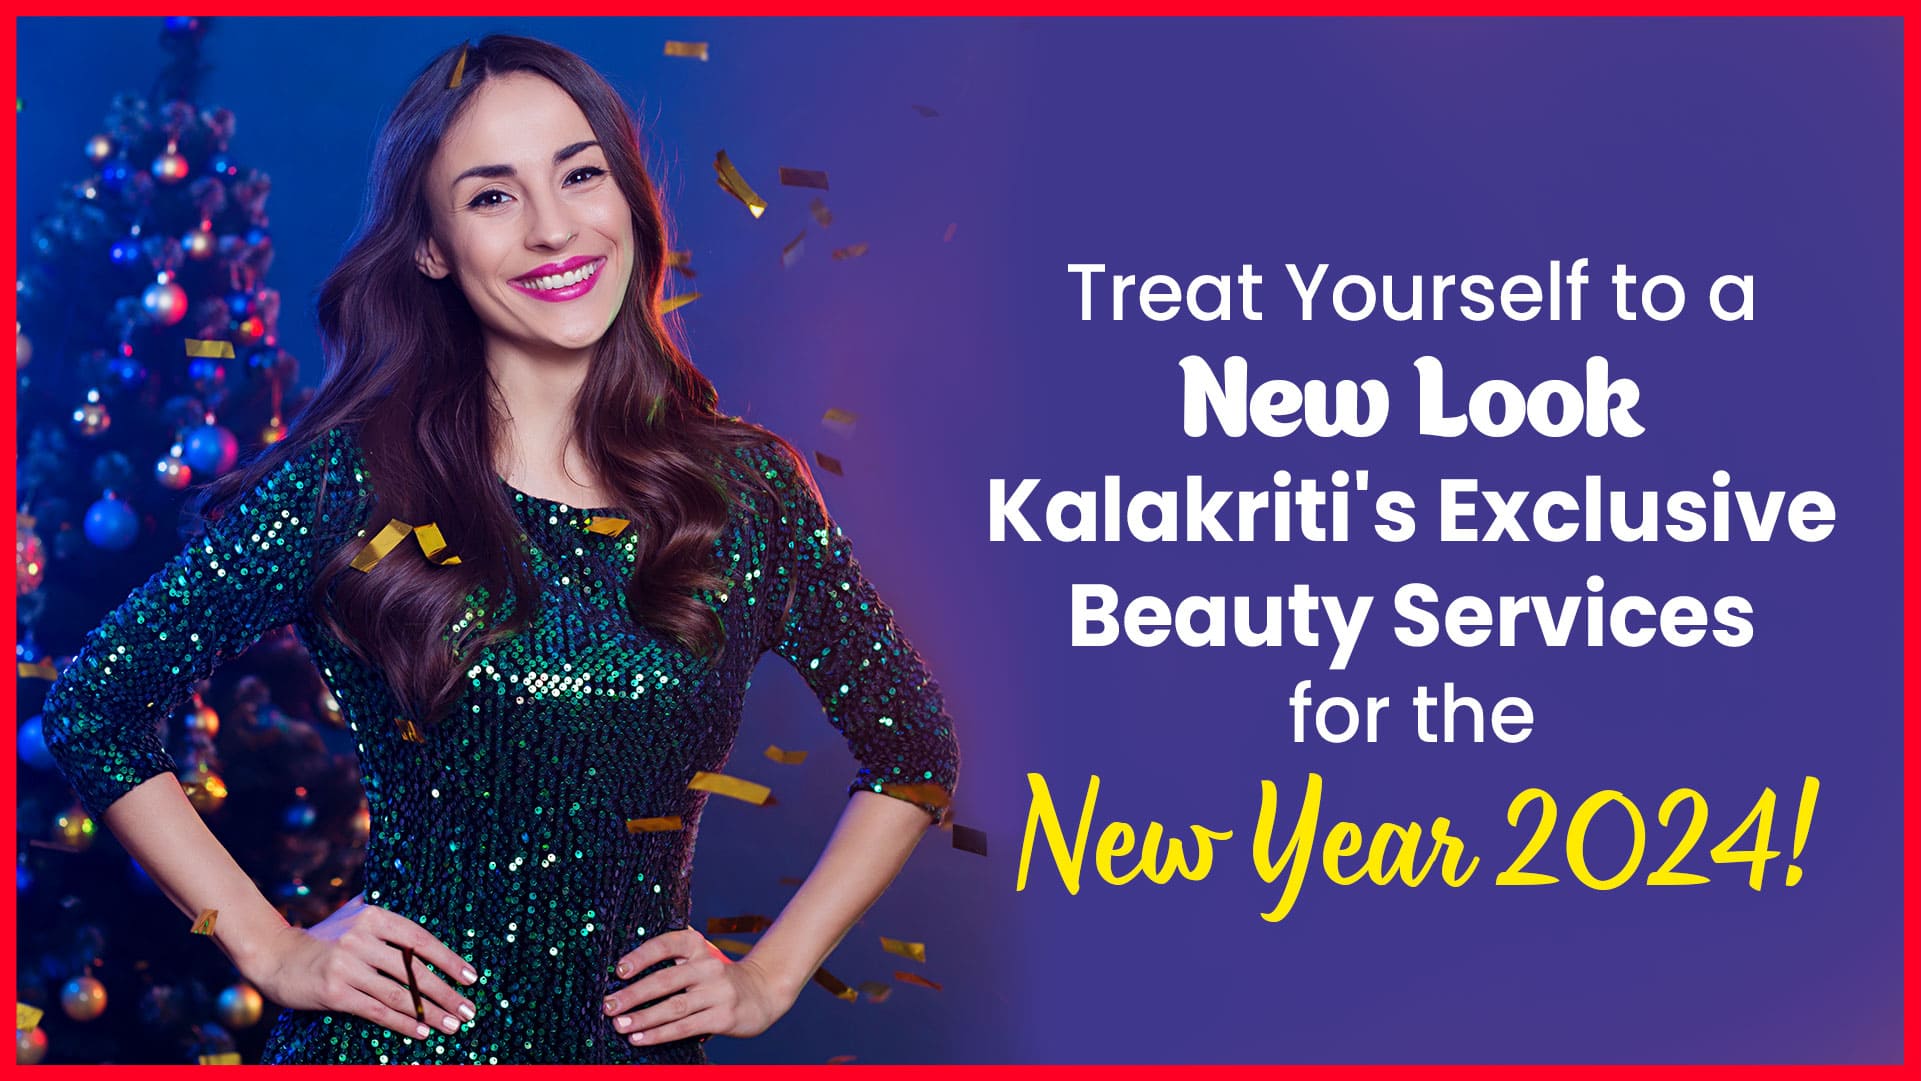 Treat Yourself to a New Look: Kalakriti's Exclusive Beauty Services for the New Year 2024!